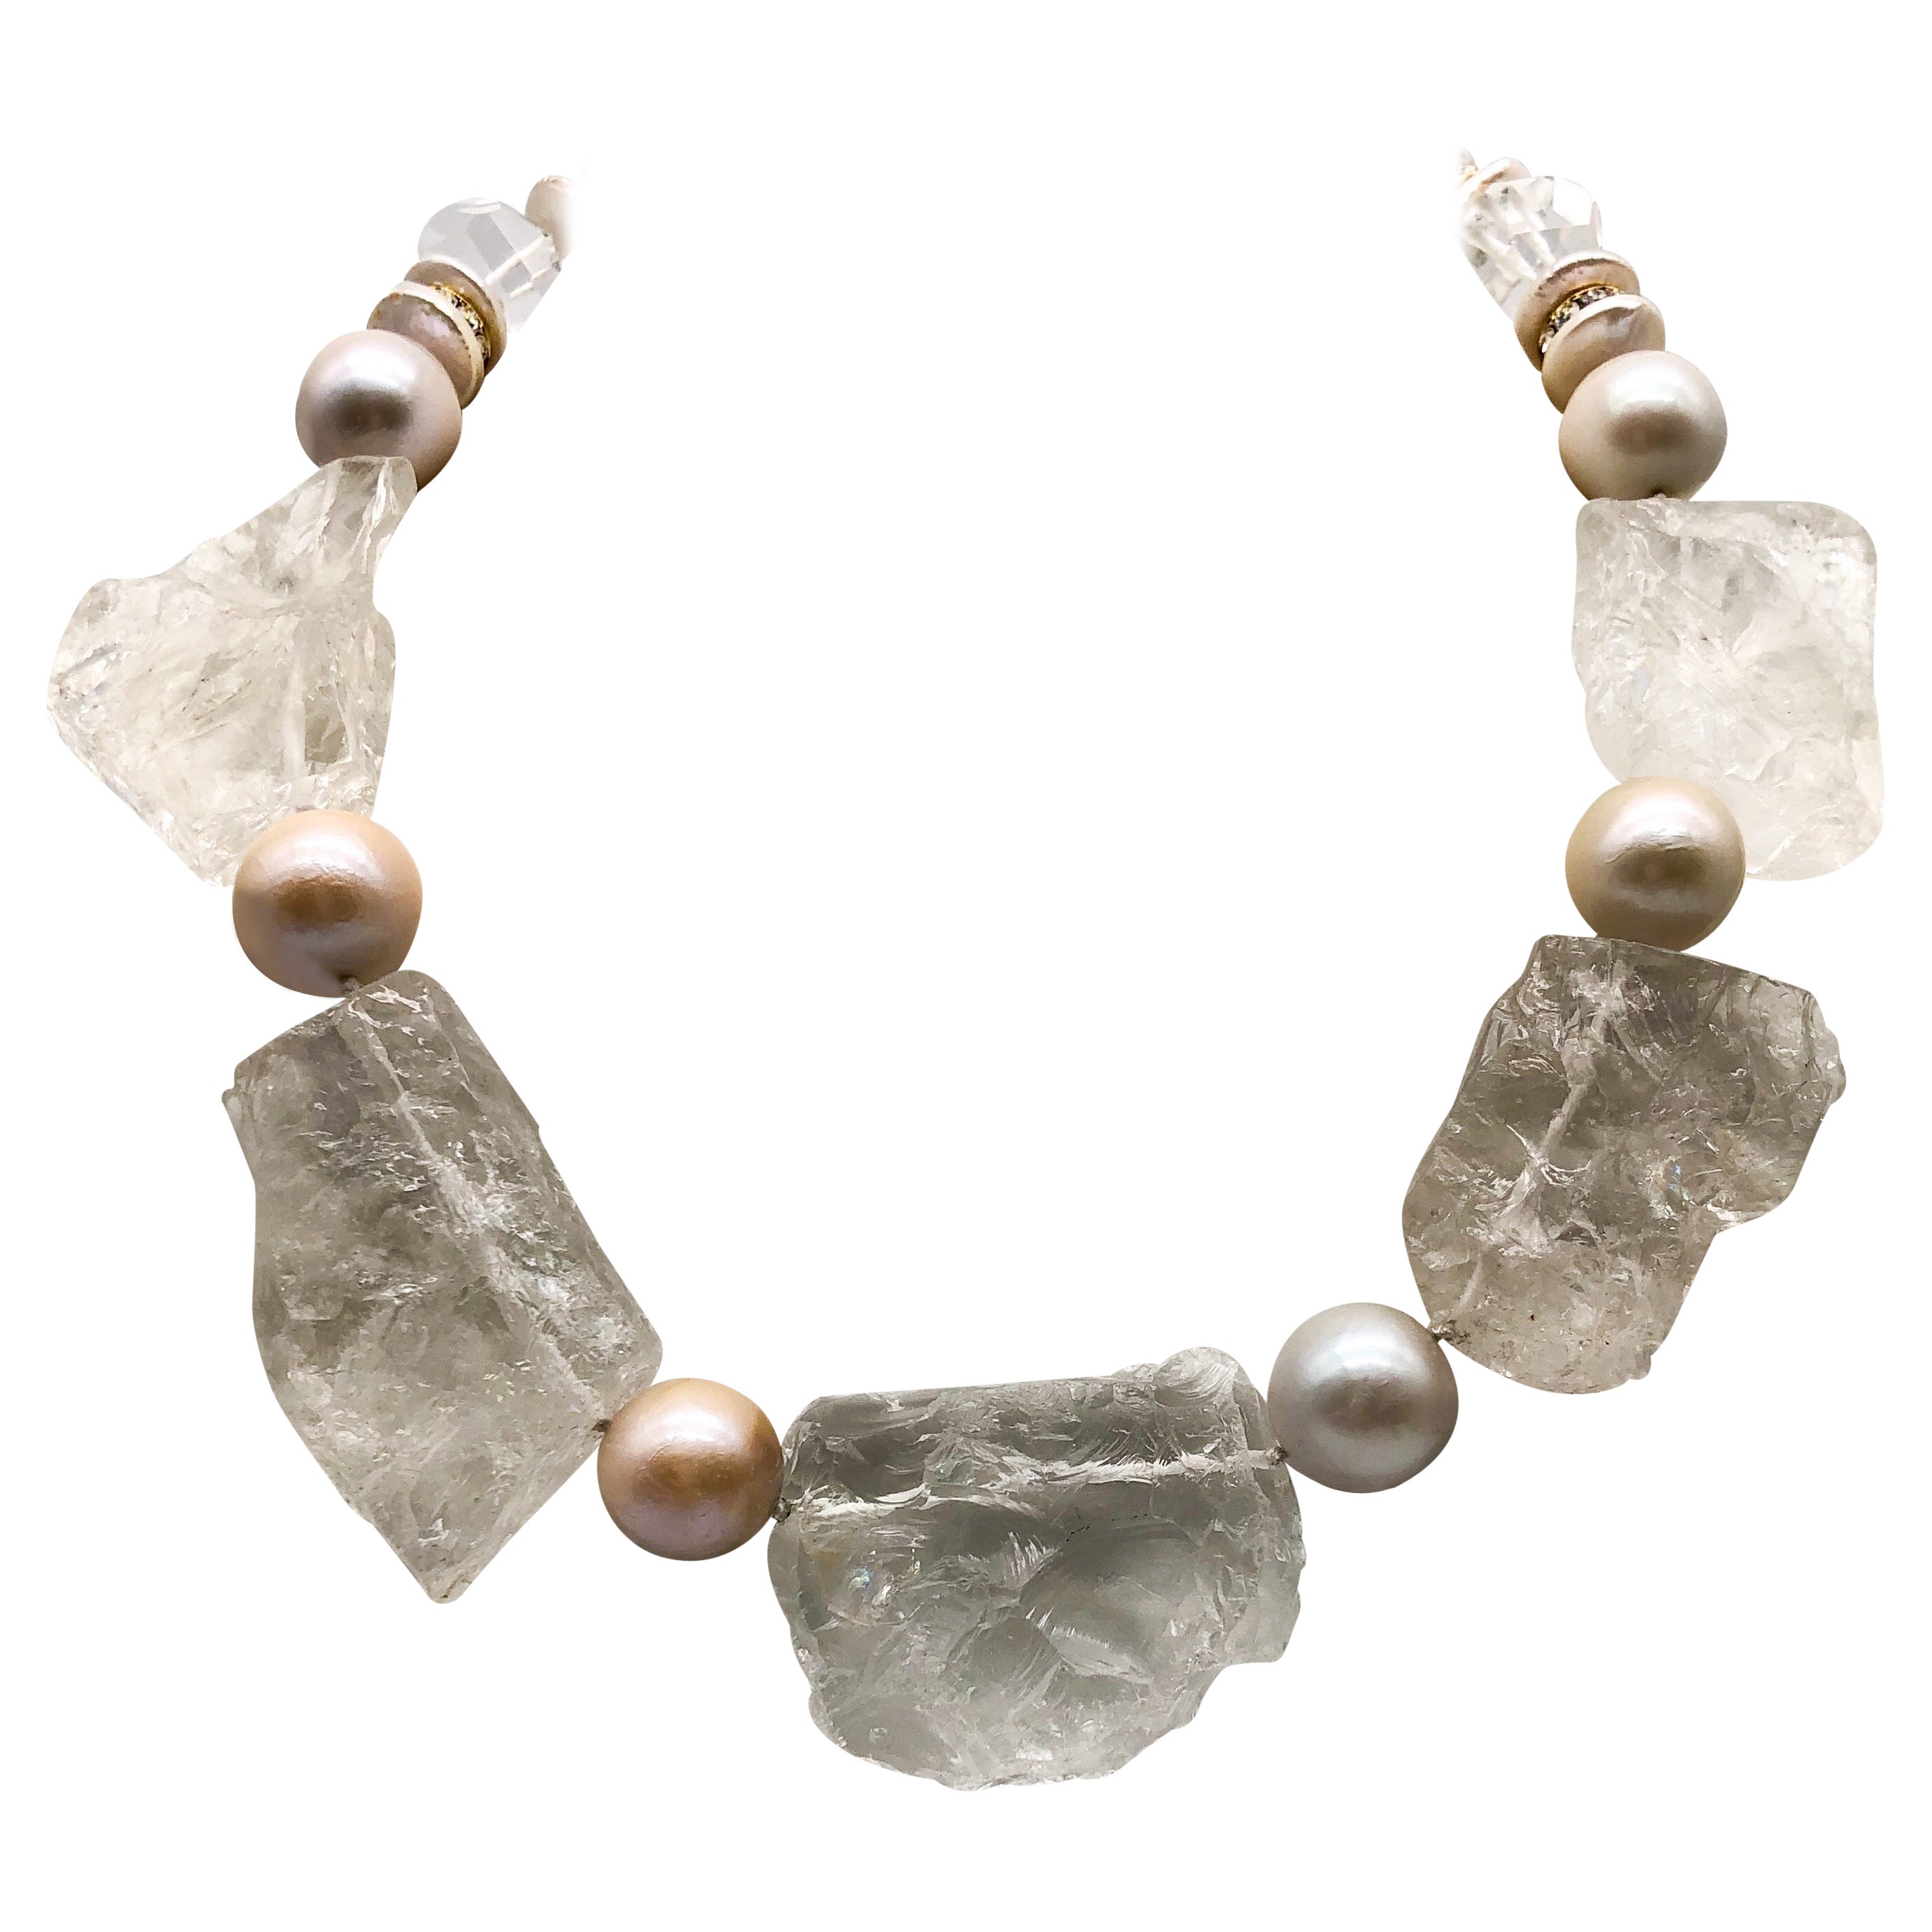 A.Jeschel Massive rich hammered Rock Crystal Necklace